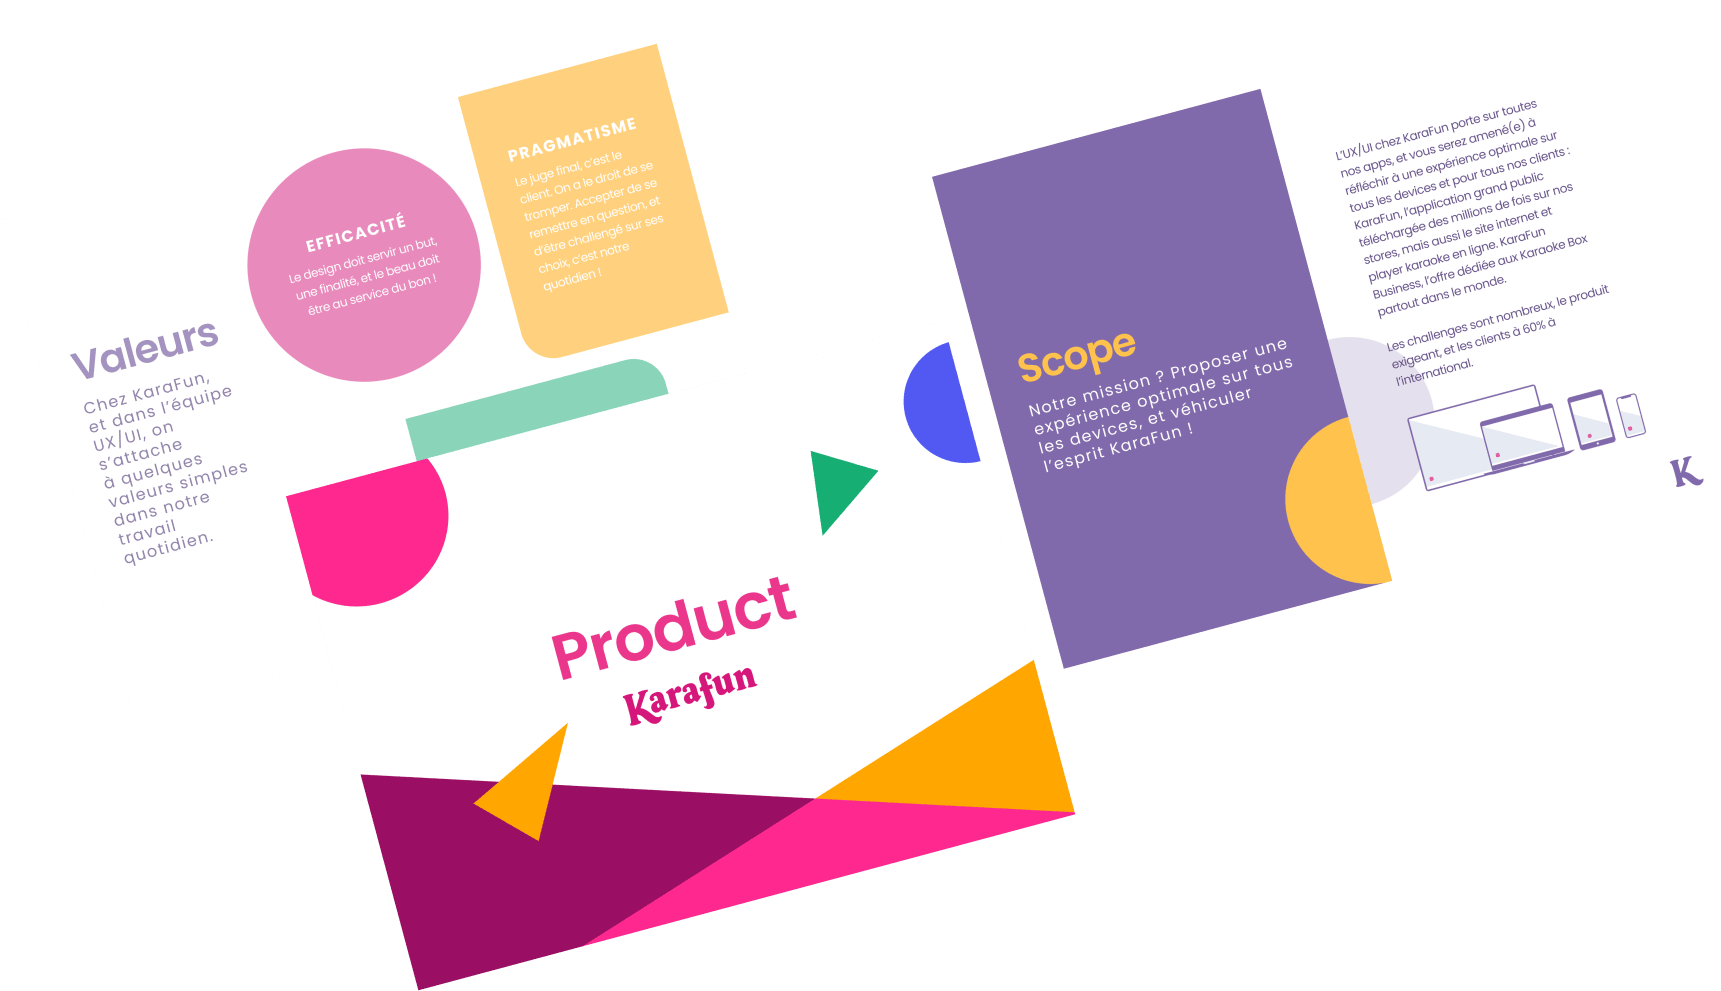 Download our Product Manifesto